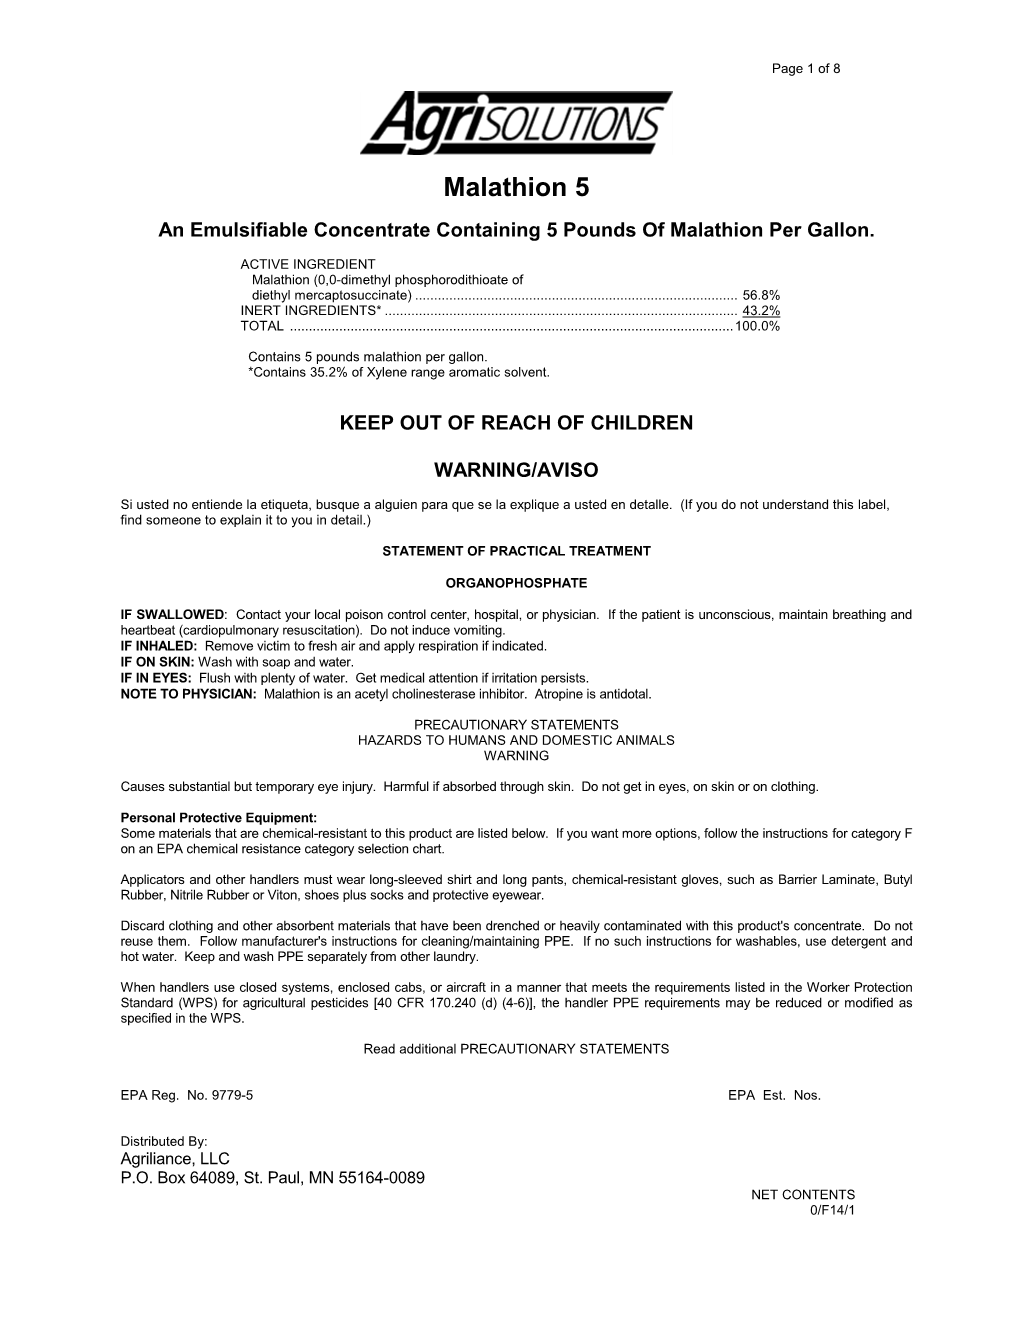 Malathion 5 an Emulsifiable Concentrate Containing 5 Pounds of Malathion Per Gallon